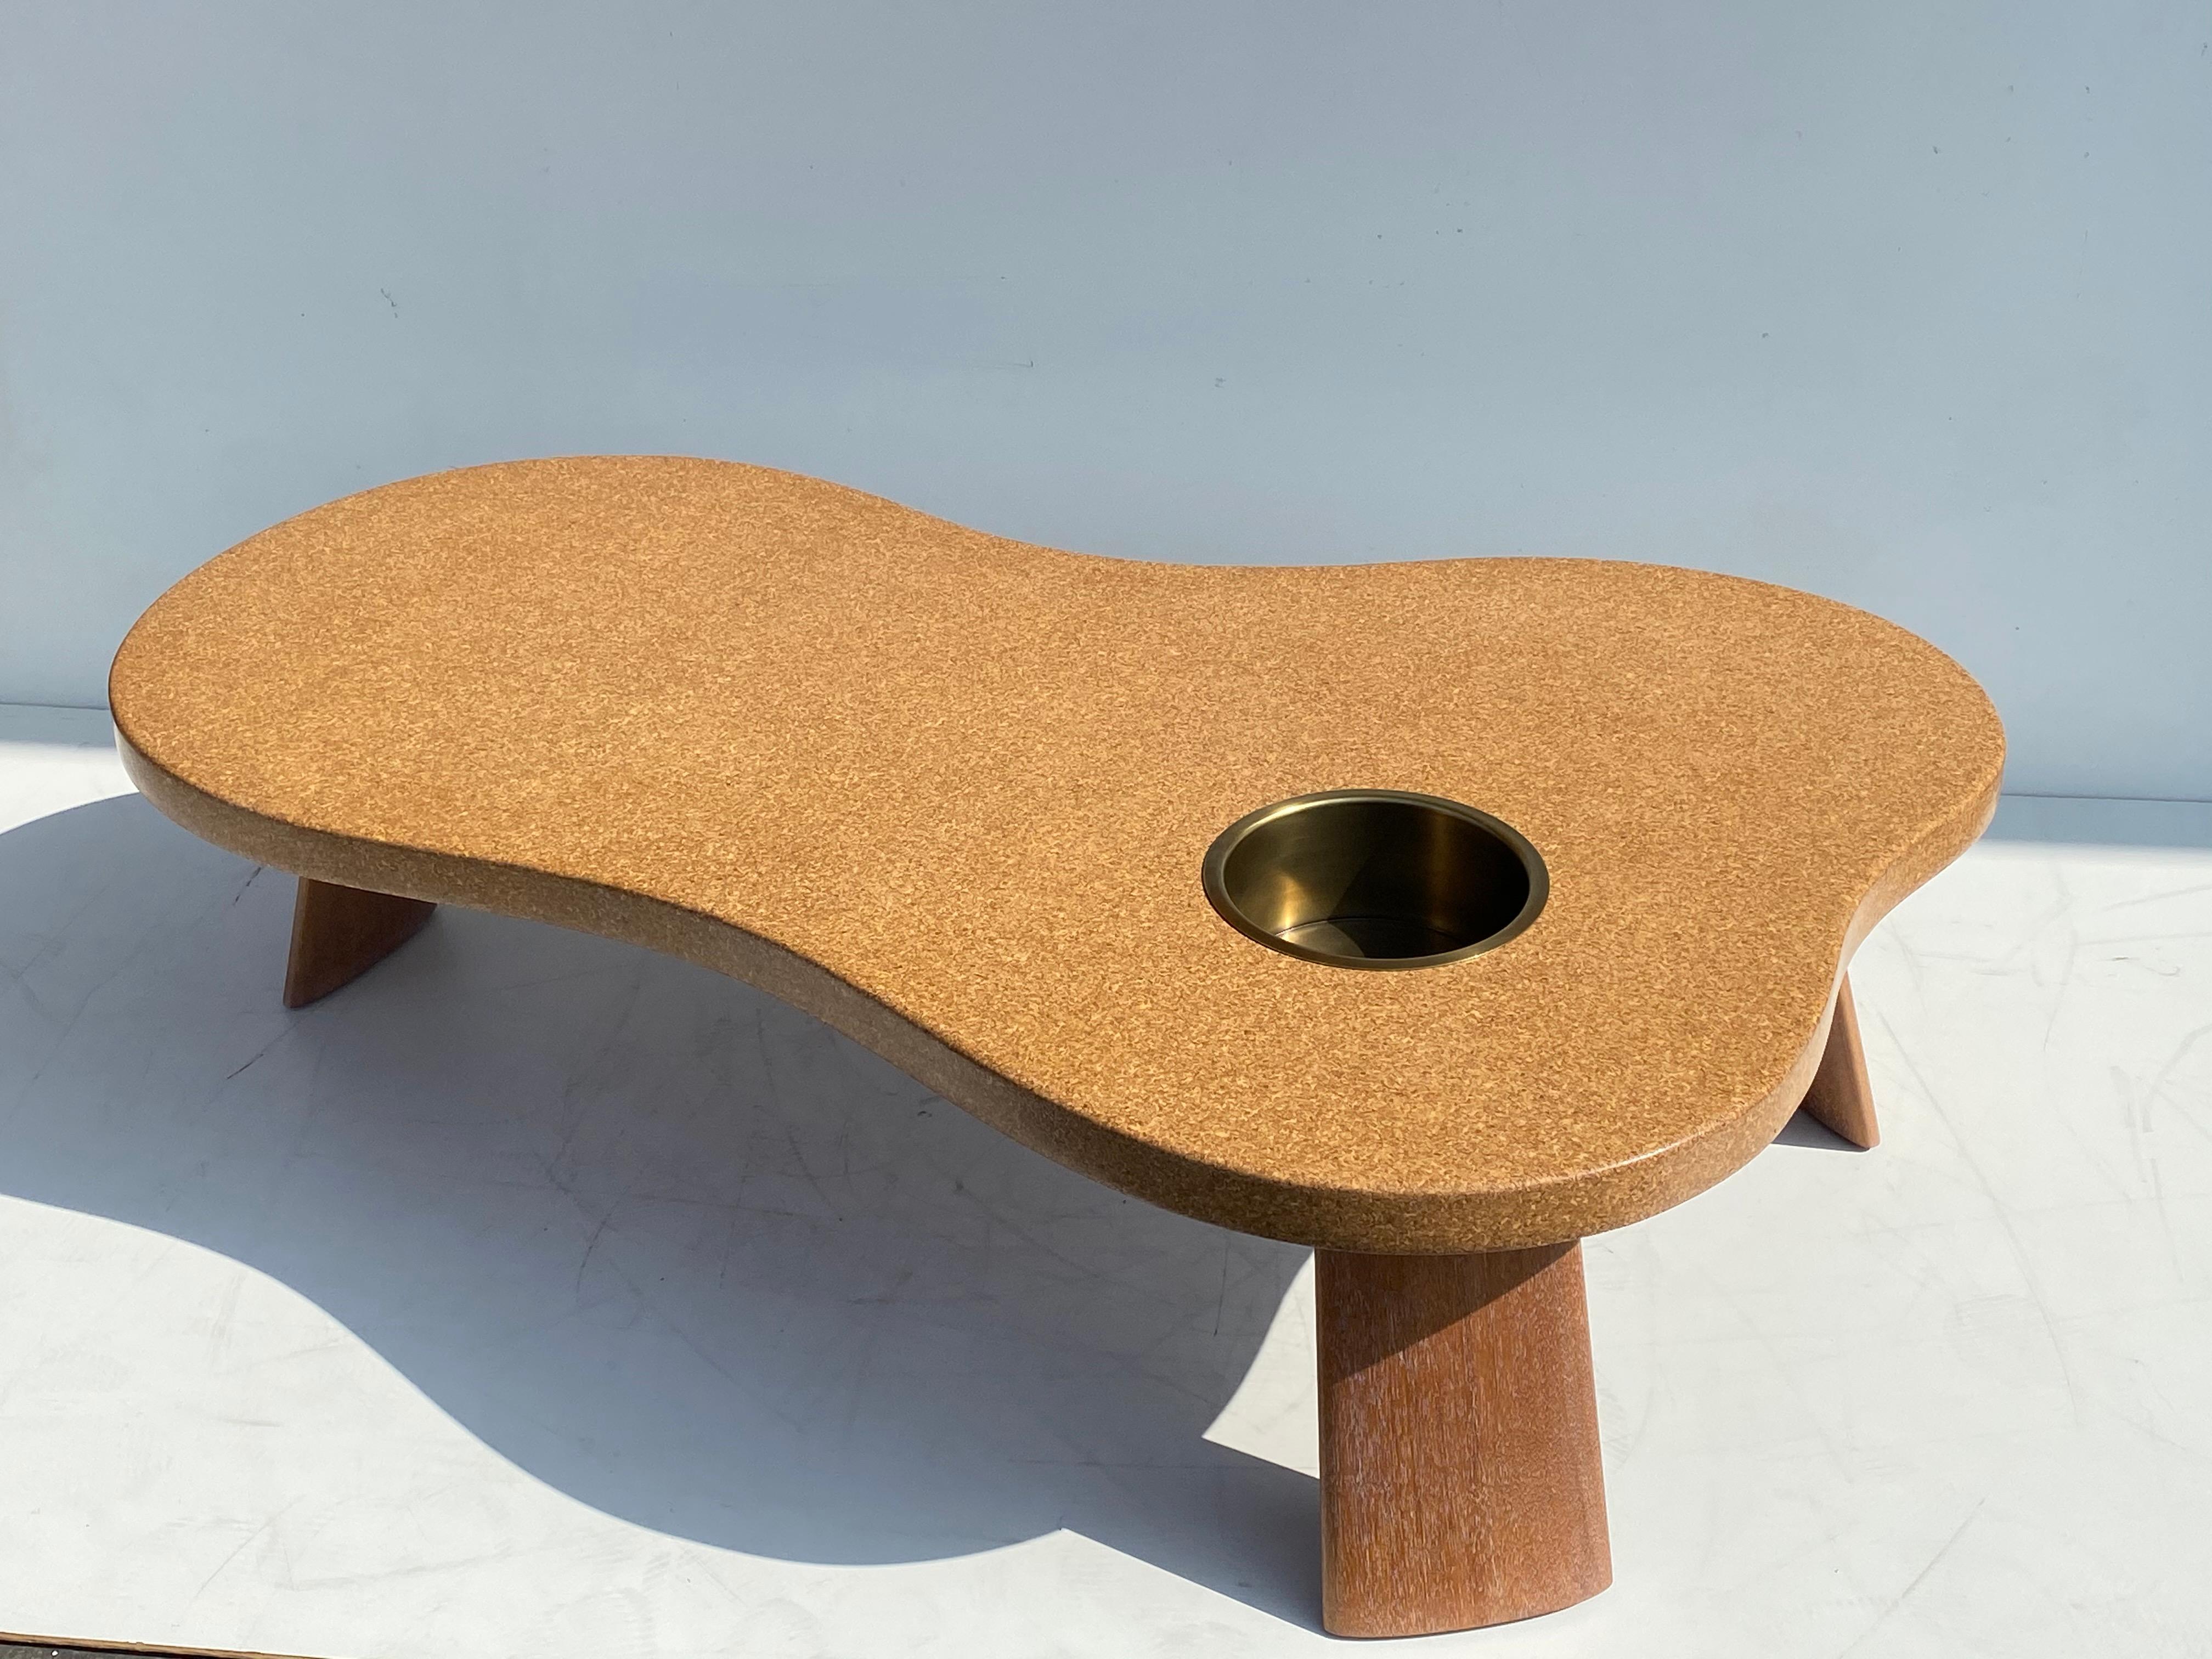 Organic shape cork and bleached Mahogany coffee table with removable planter or beverage cooler.
Brass planter / cooler is 8